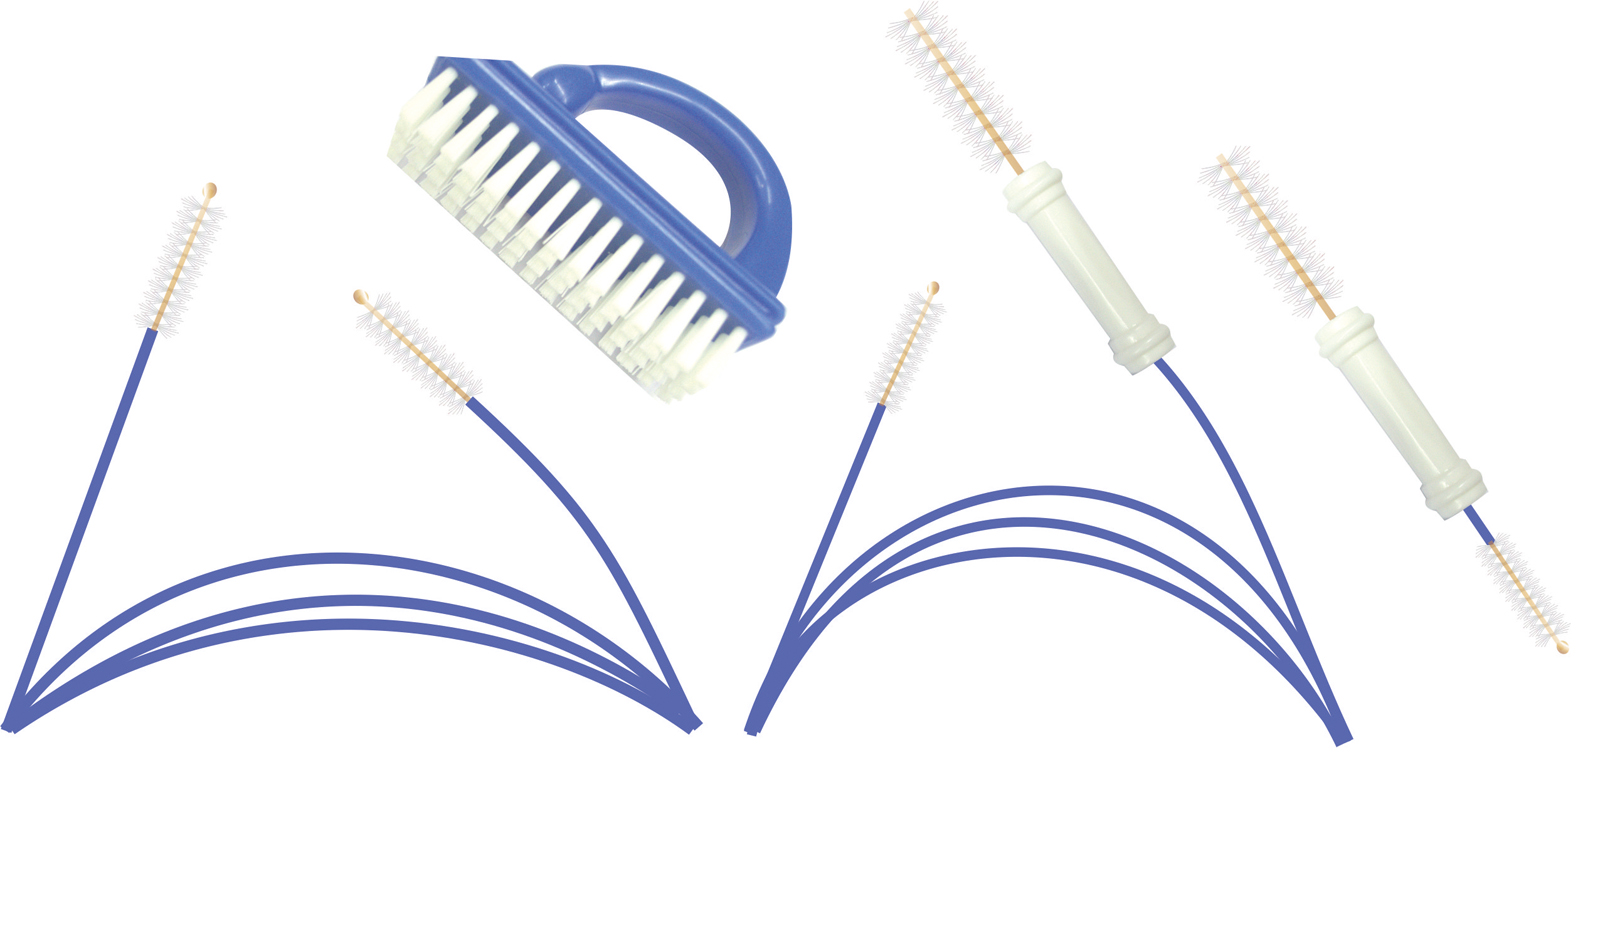 Cleaning Brushes - Cantel Medical